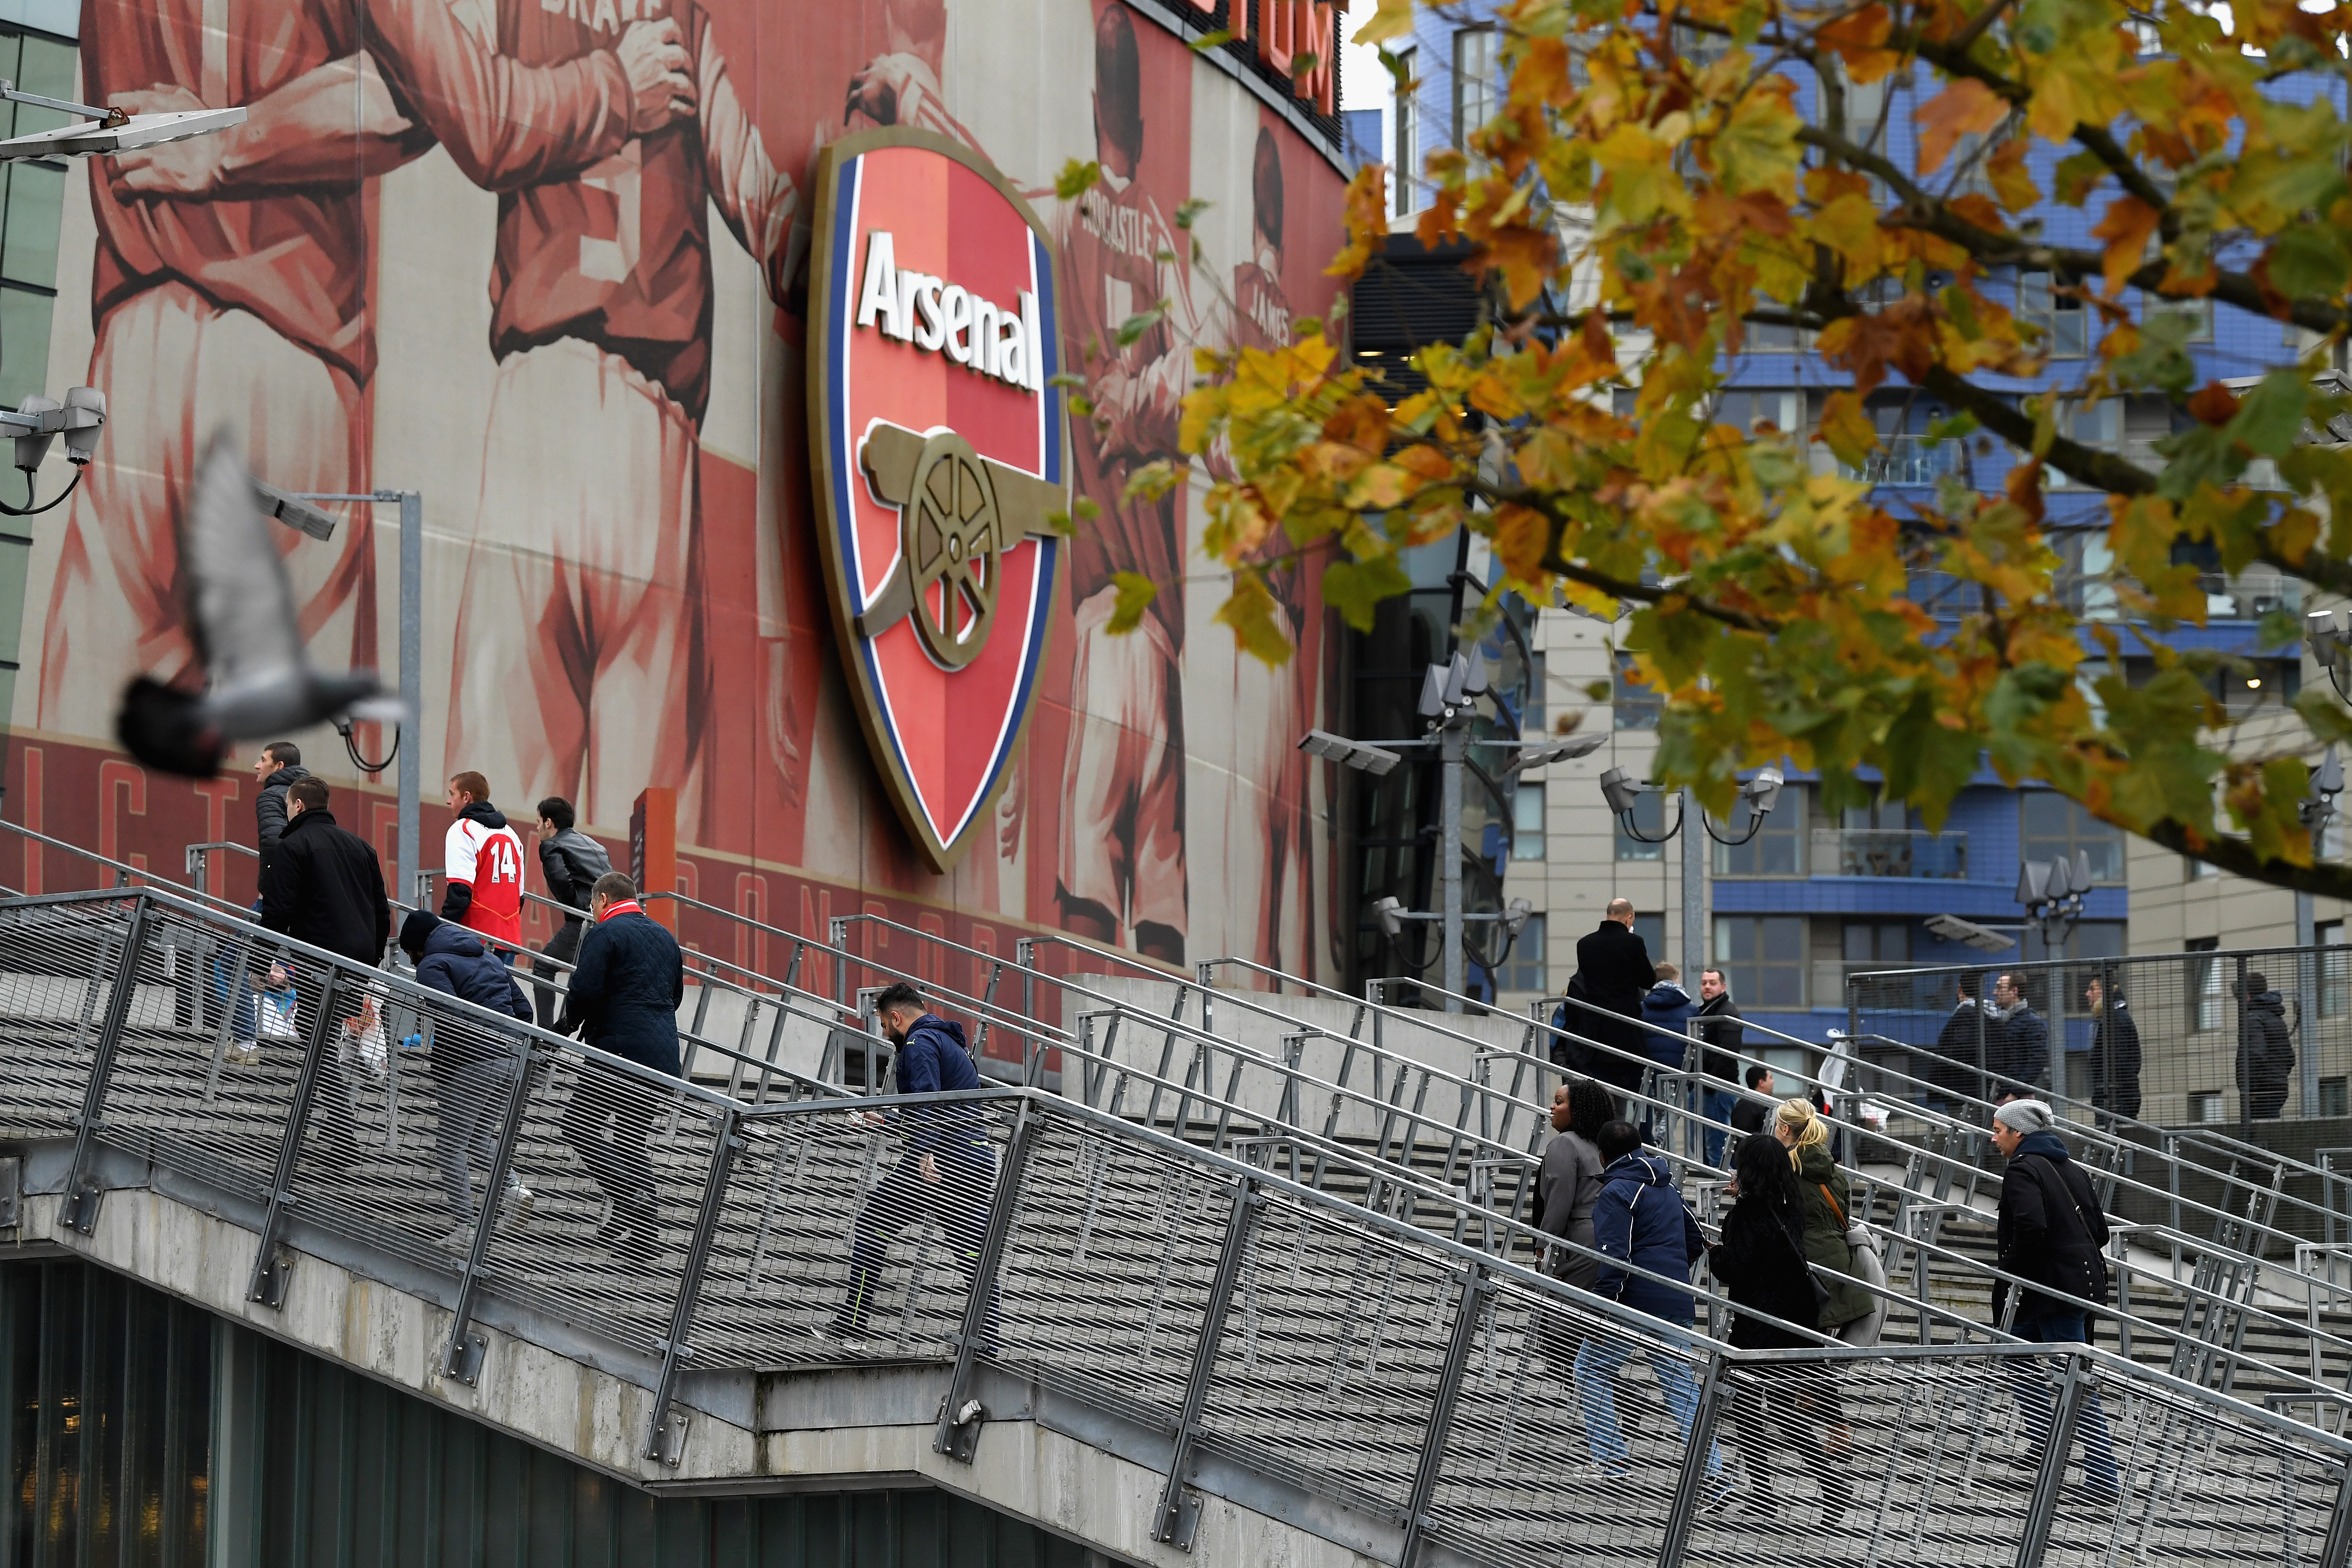 LONDON, ENGLAND - NOVEMBER 18:  Fans make their way to the stadium during the Premier League match between Arsenal and Tottenham Hotspur at Emirates Stadium on November 18, 2017 in London, England.  (Photo by Mike Hewitt/Getty Images)